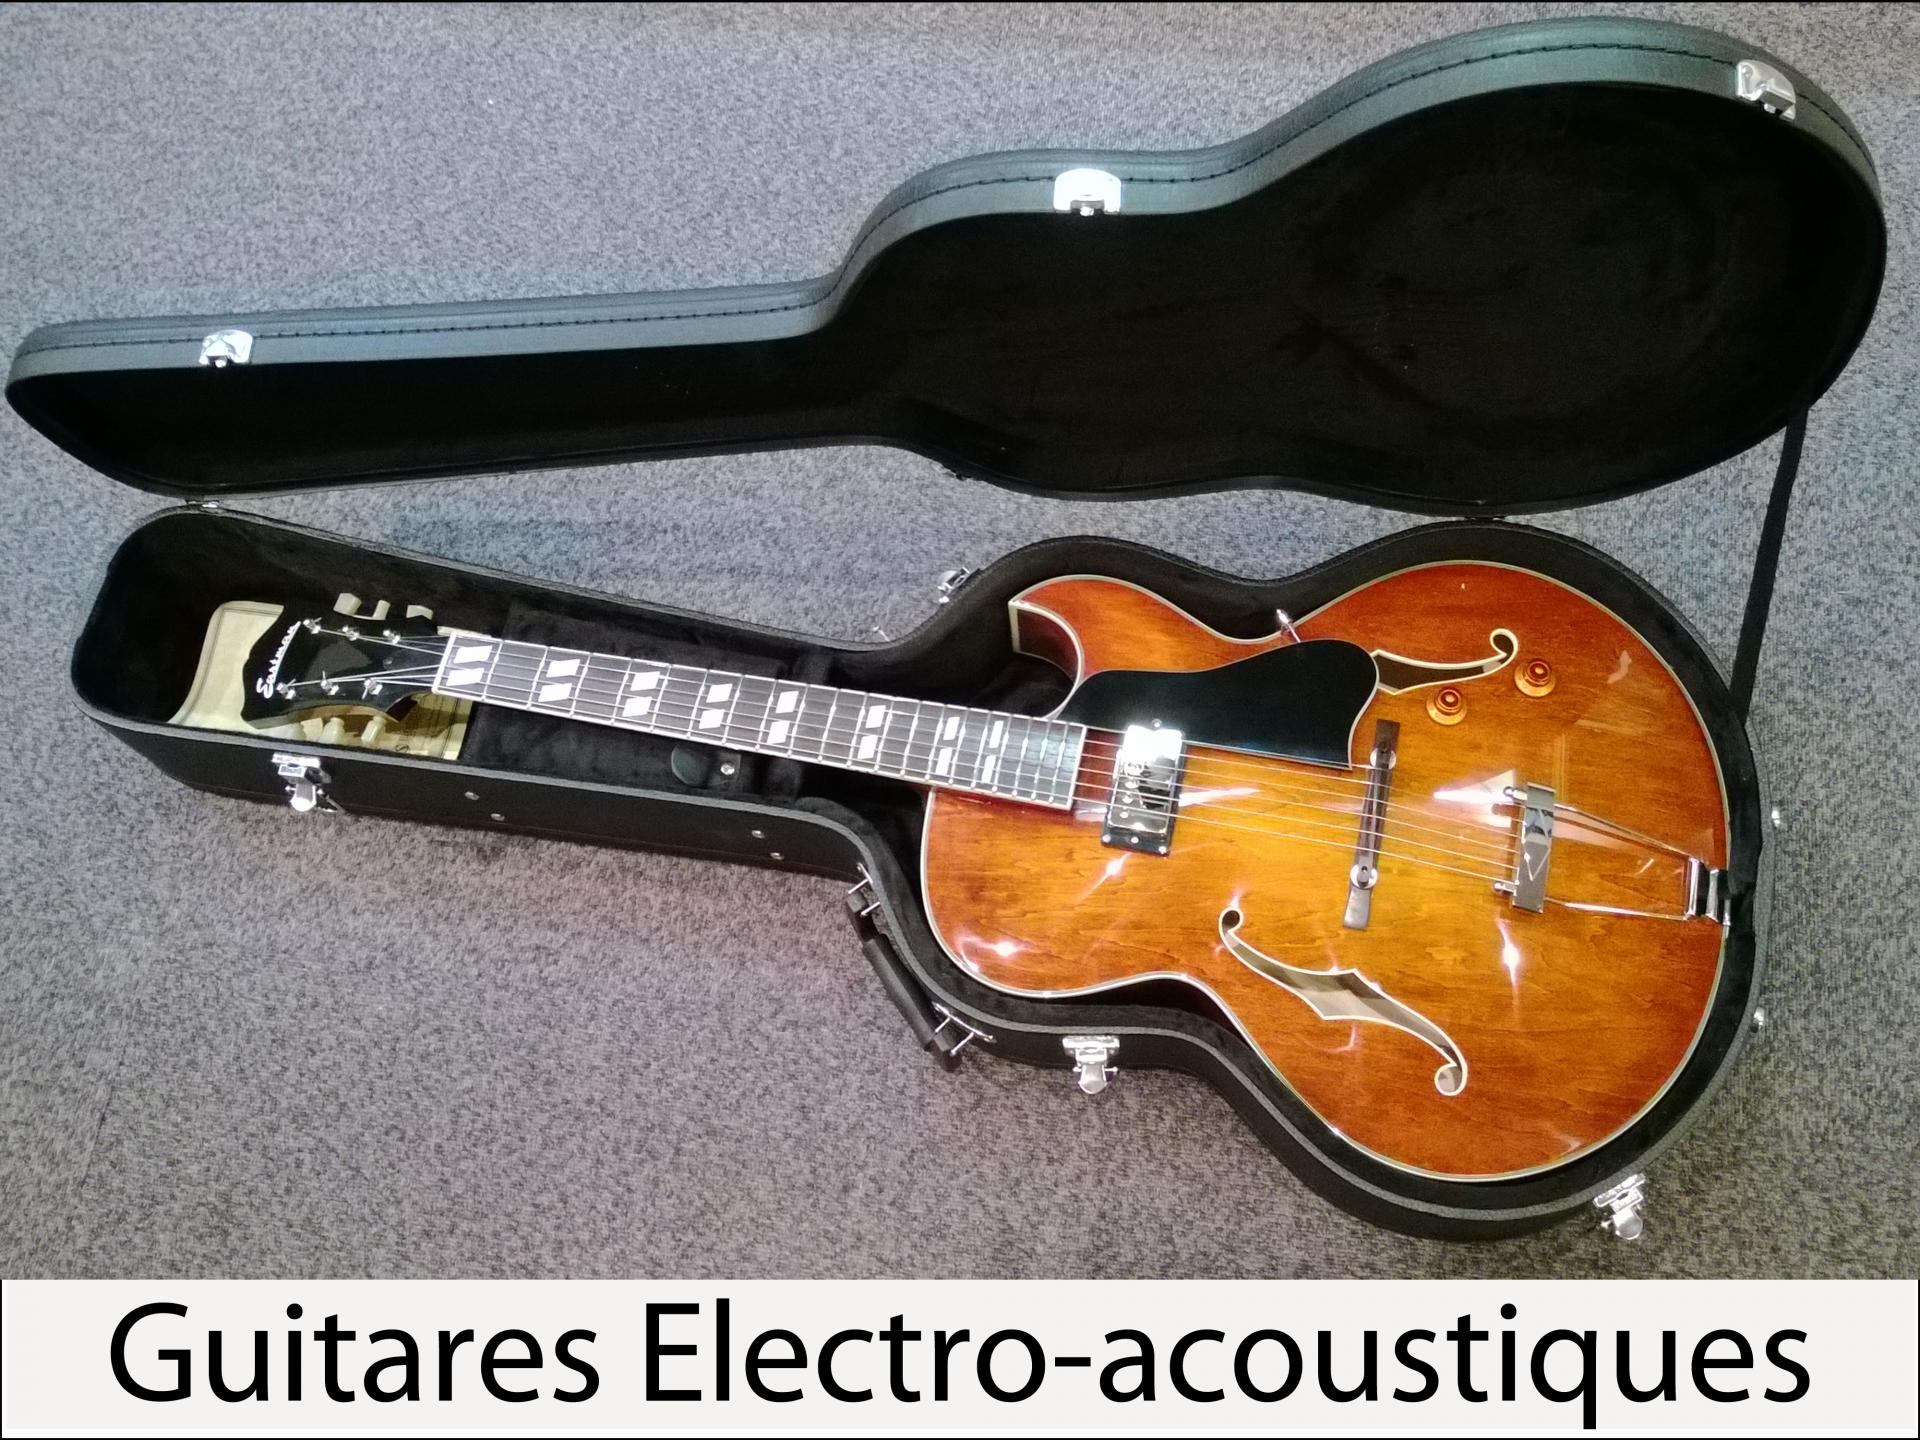 Acceuil carre guitares electro